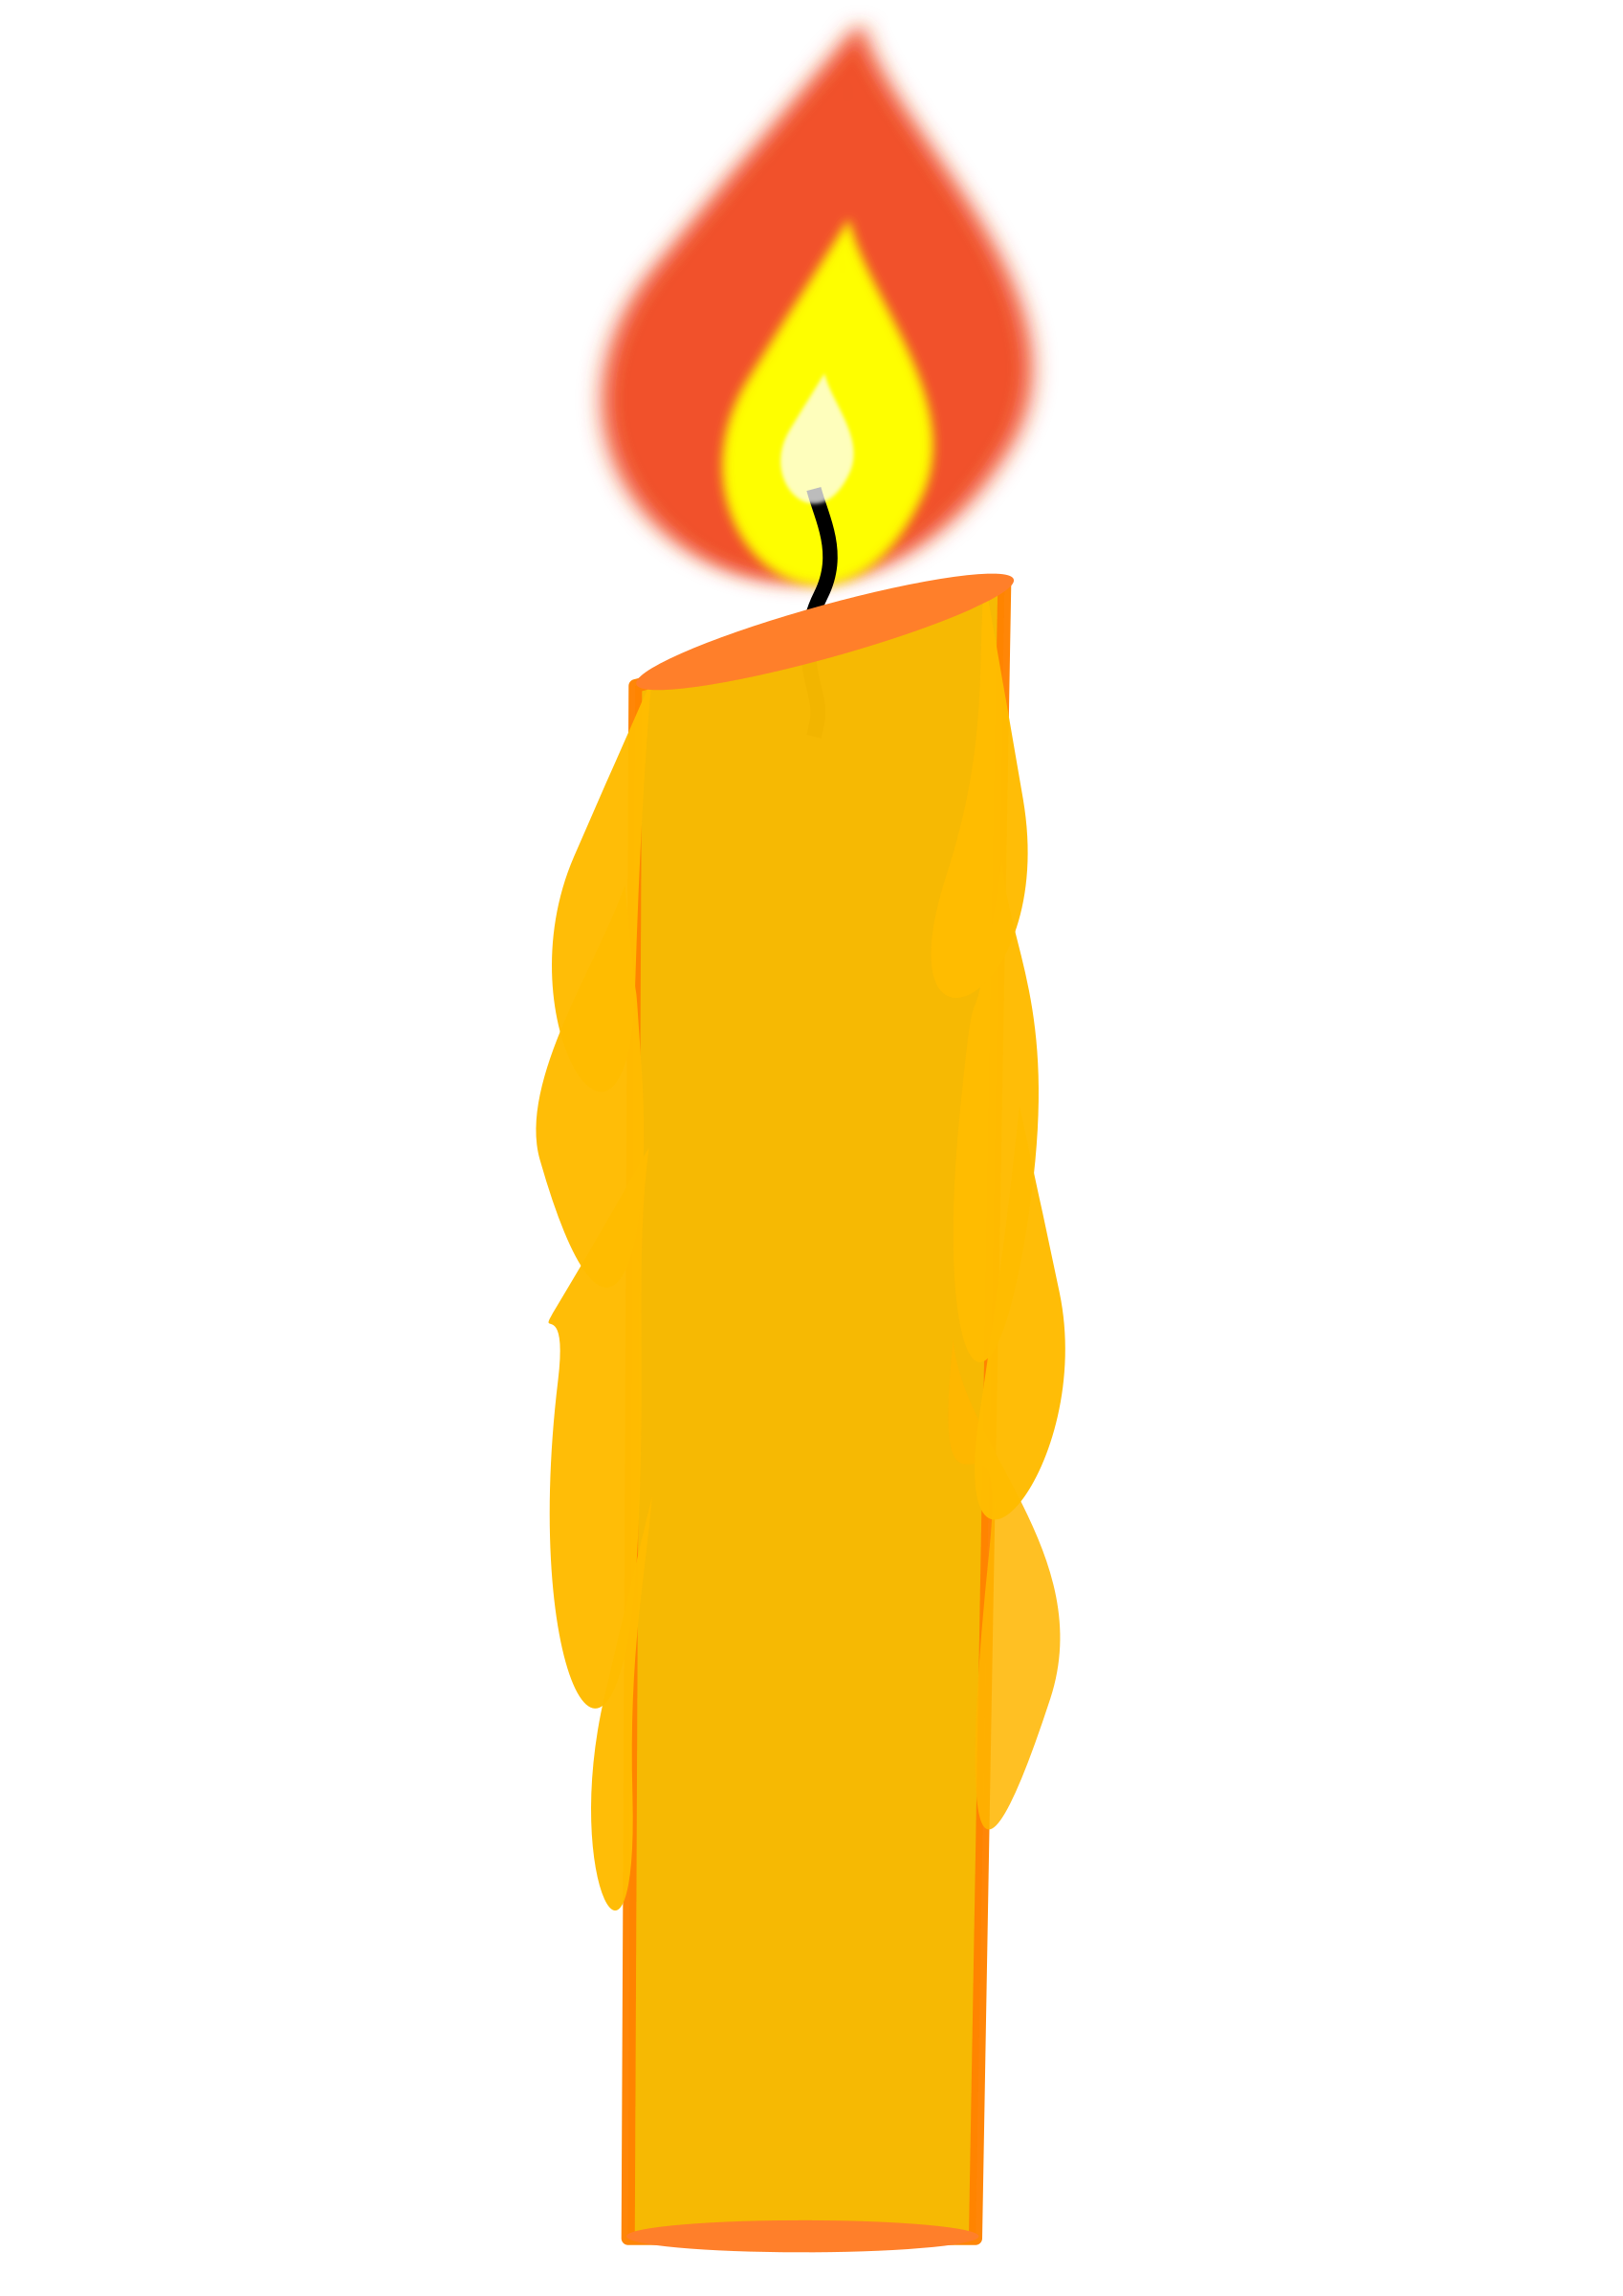 Church Candles Vector PNG HD Quality